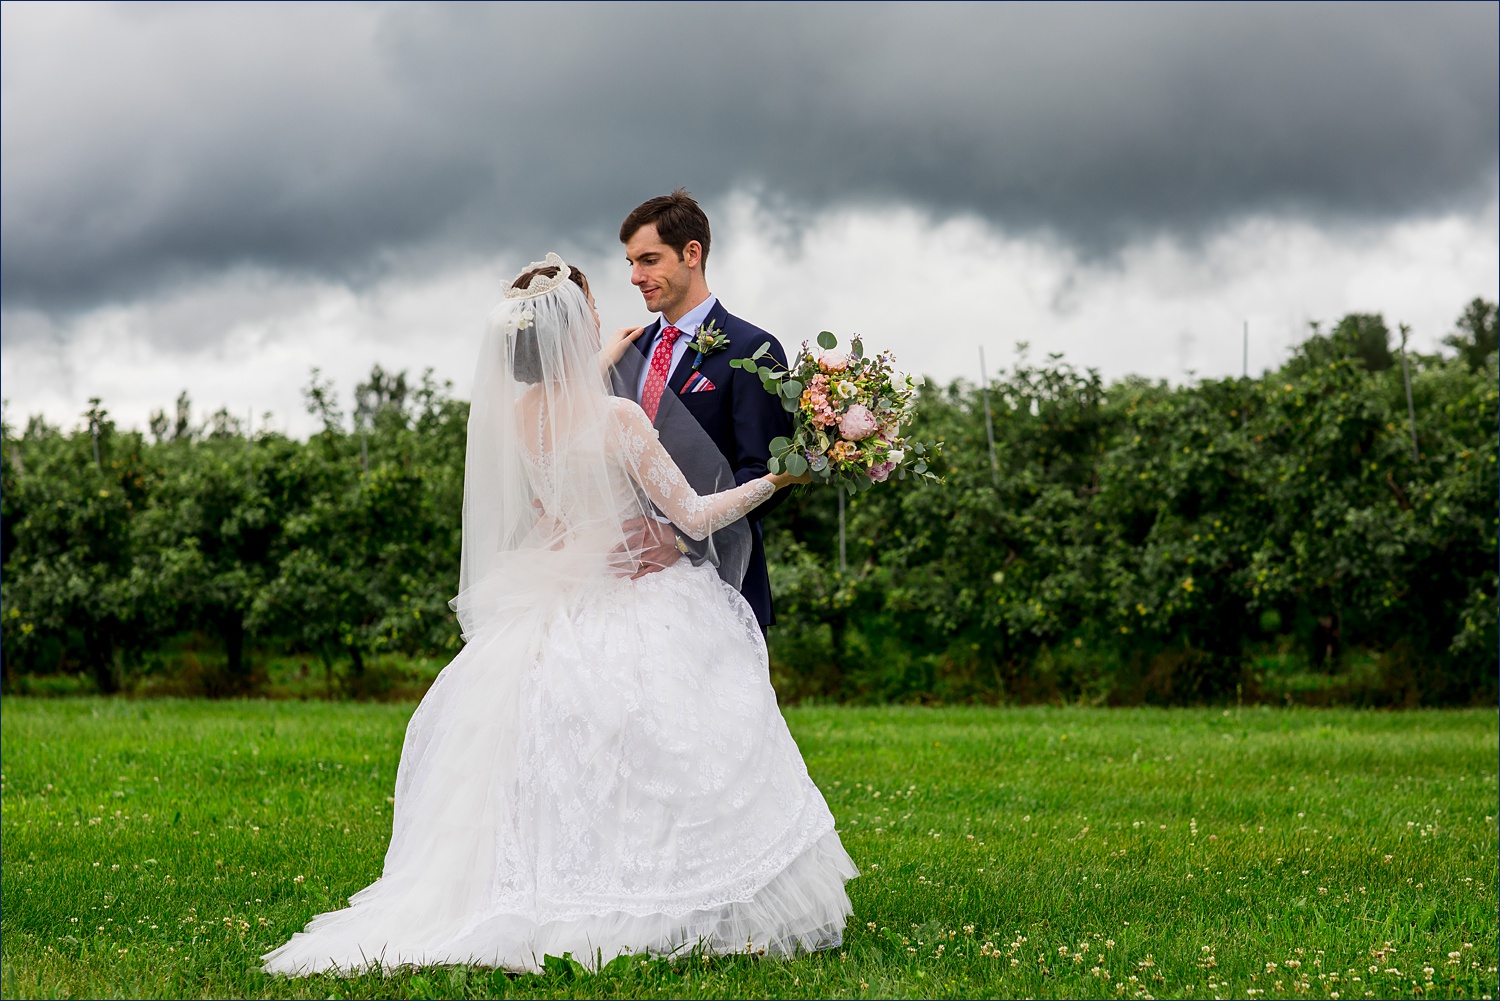 The bride and groom and a stormy sky on their wedding day in Alyson's Orchard in New Hampshire